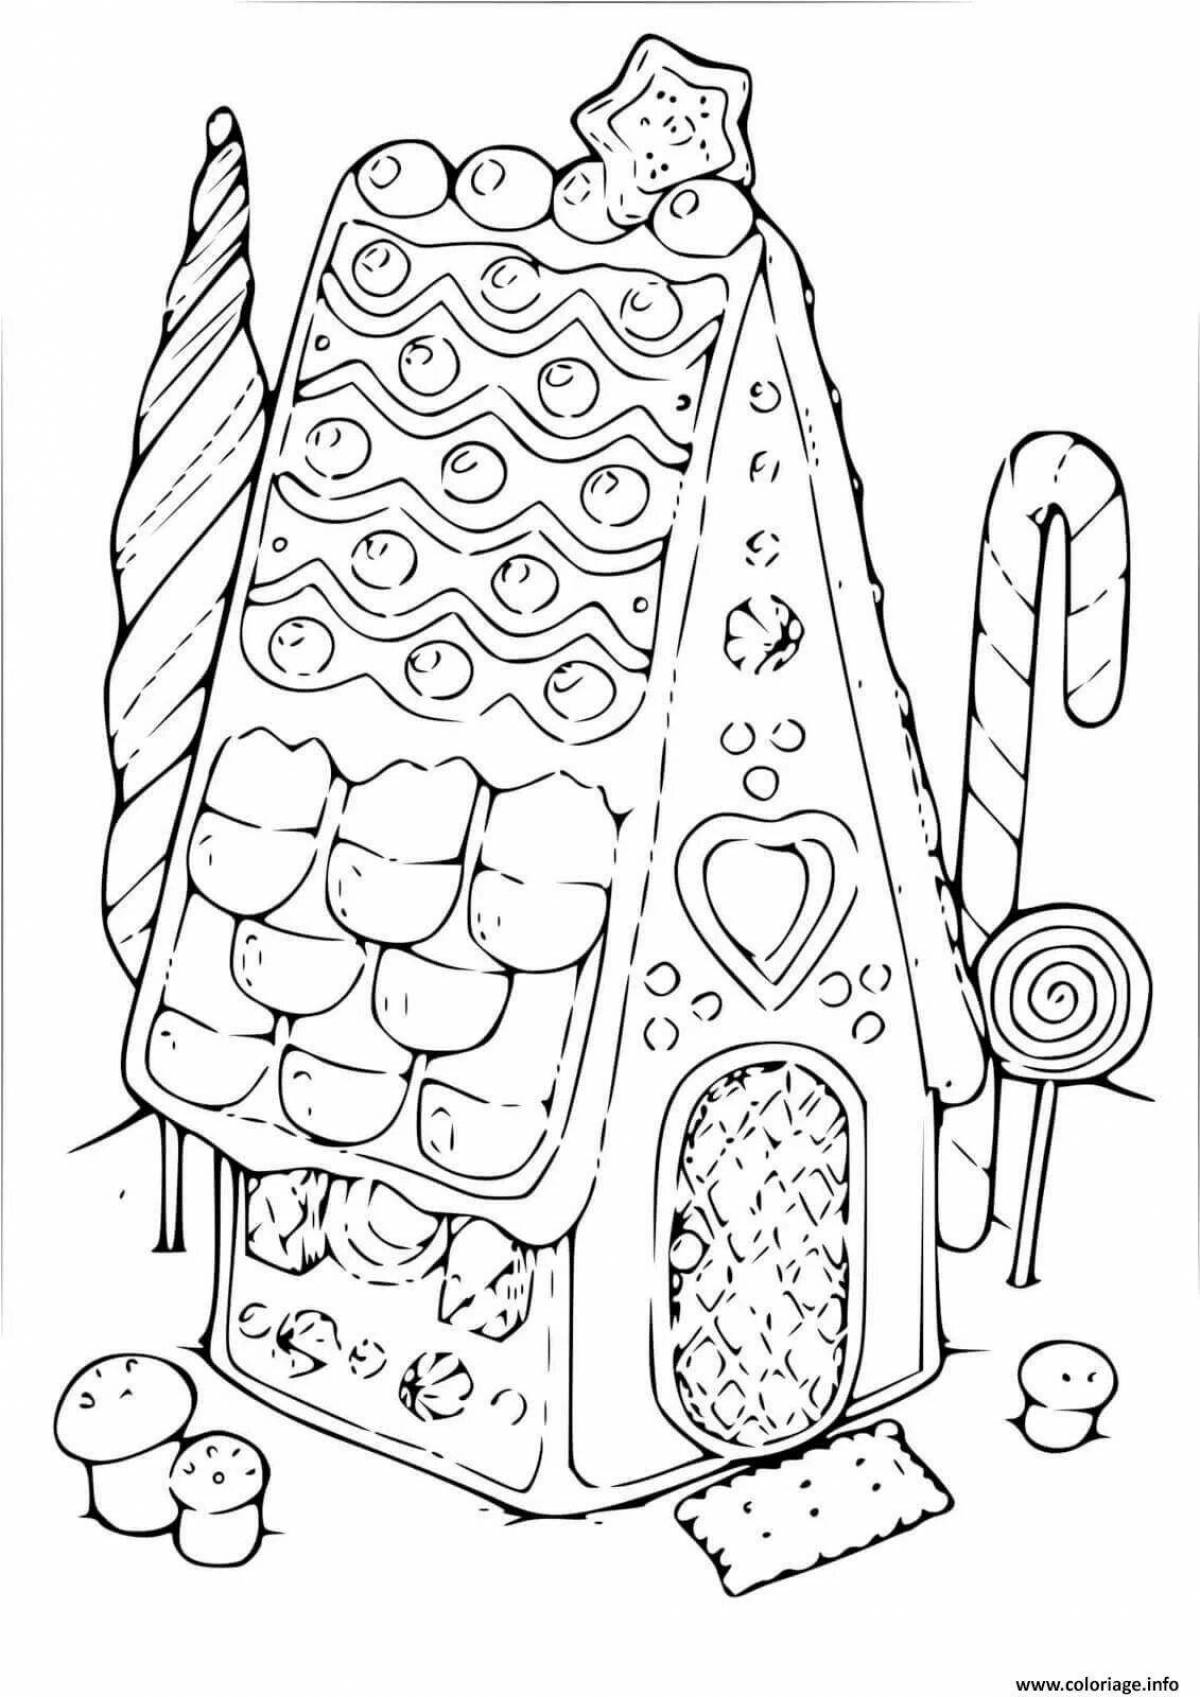 Coloring page merry Christmas house